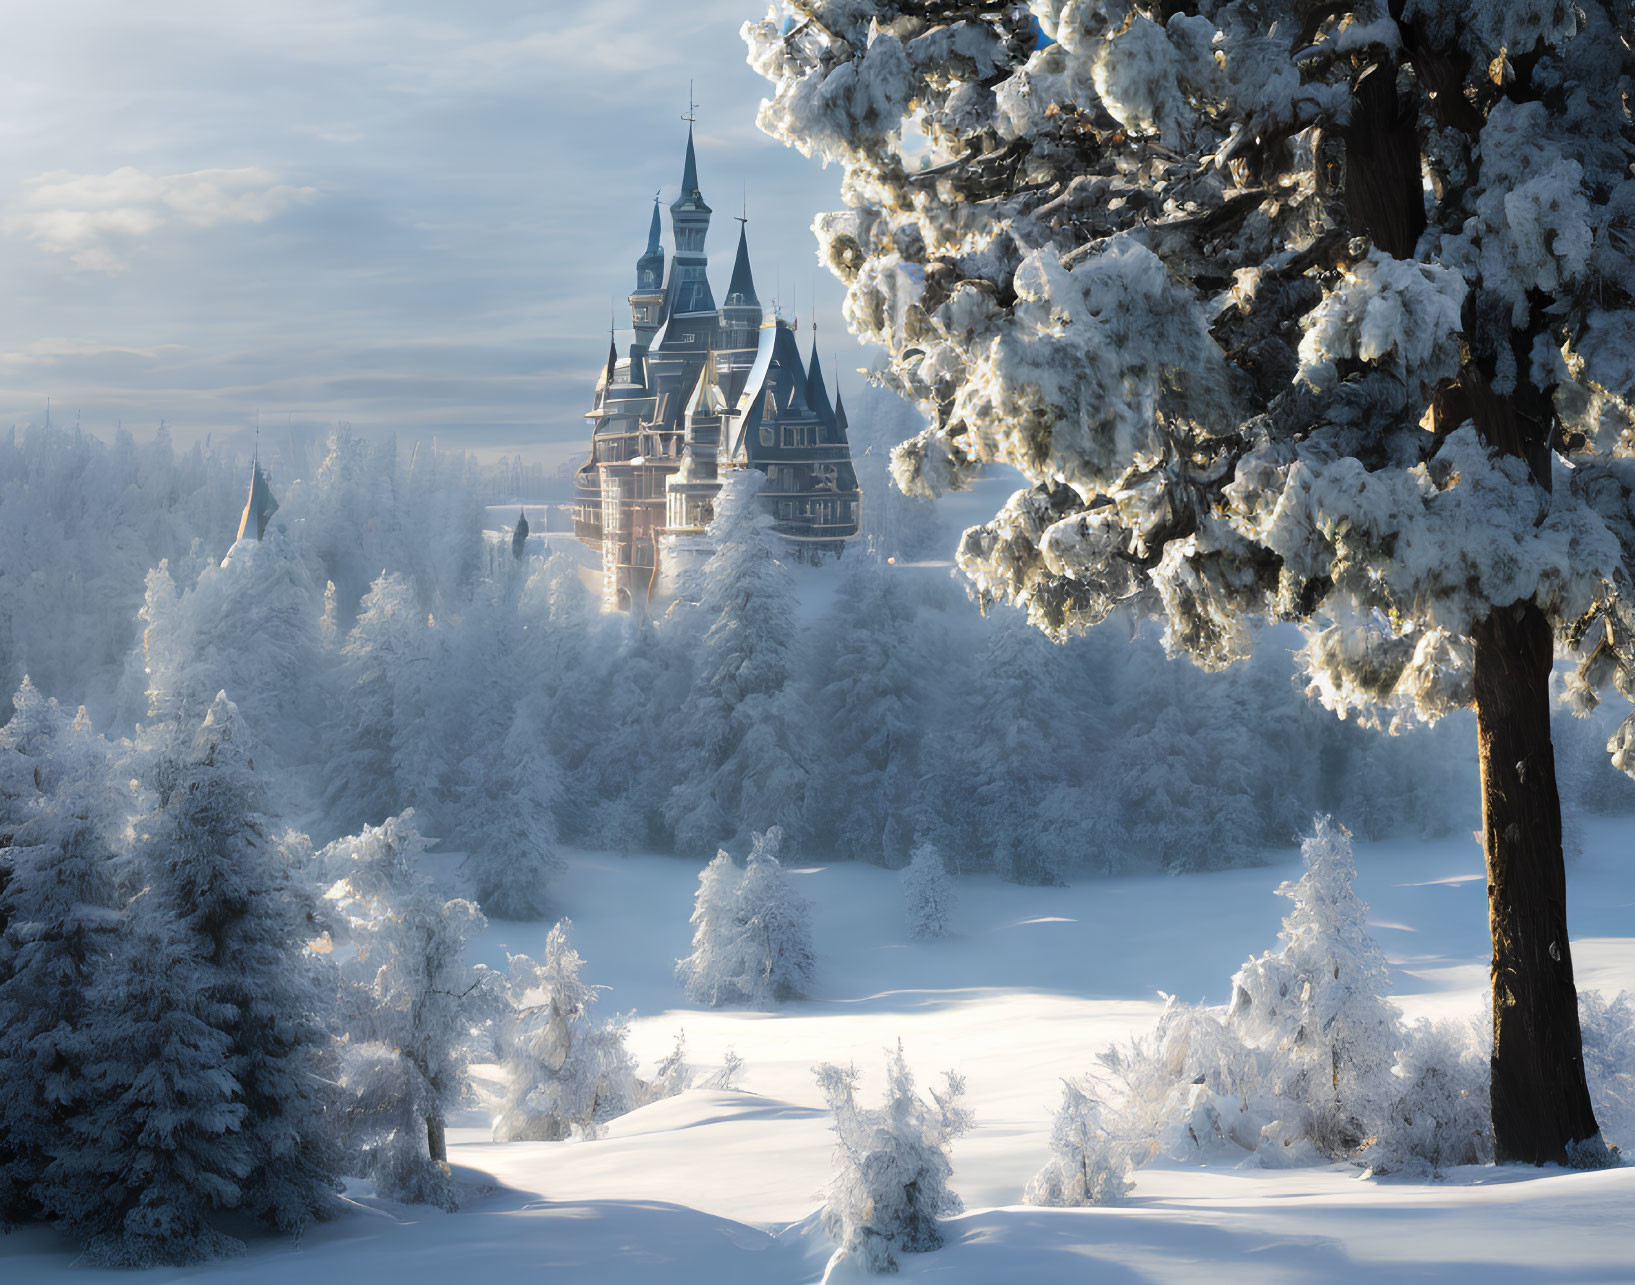 Snow-covered trees and majestic castle in serene winter landscape